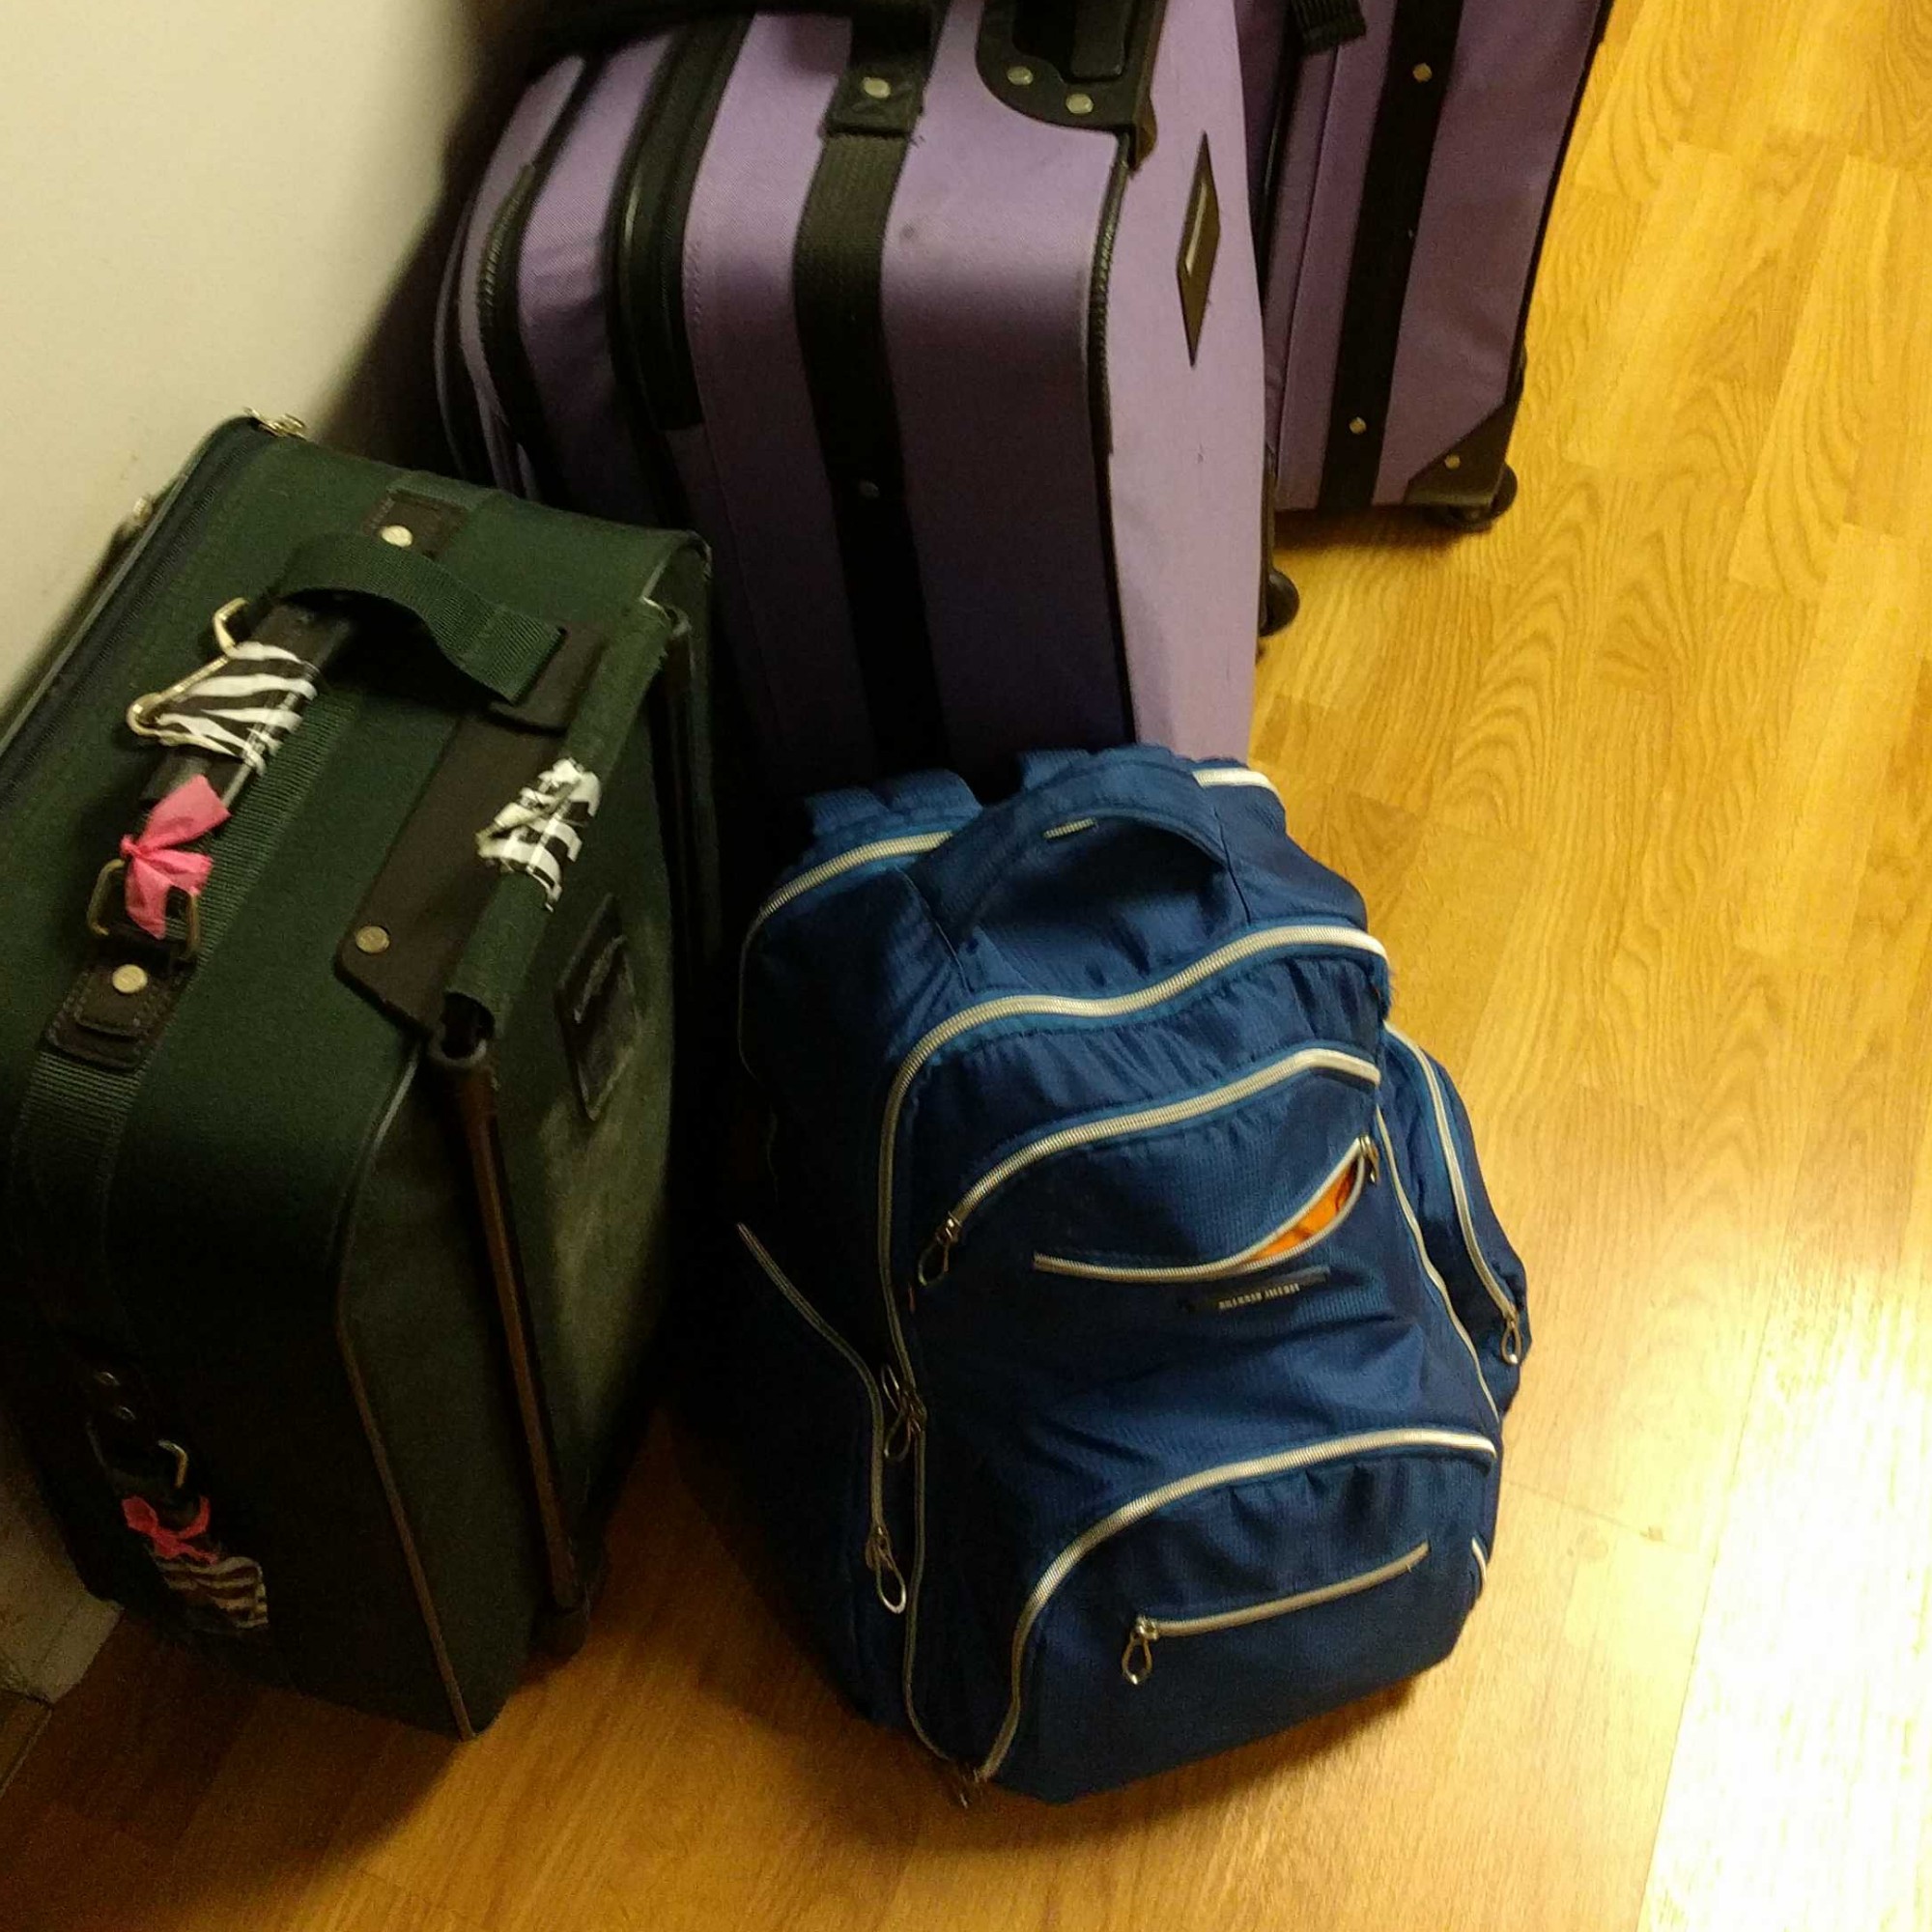 packed luggage for running away from life (again)